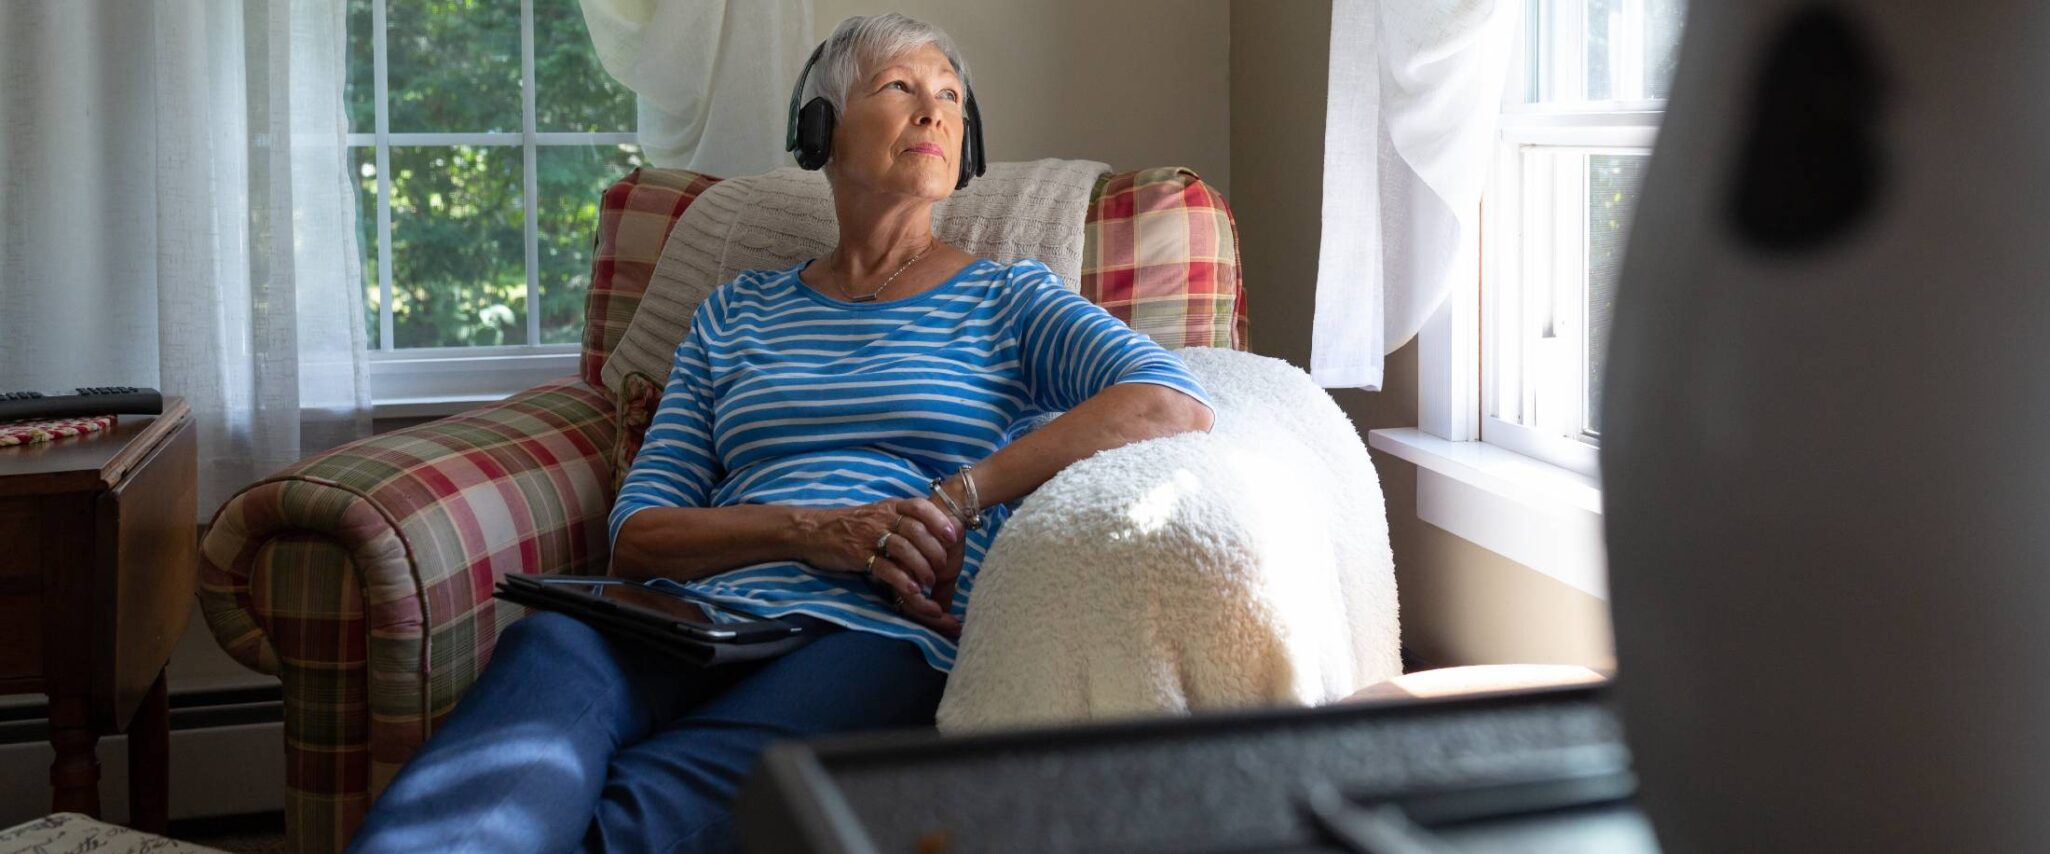 senior lady listening to music with headphones on while looking out a window